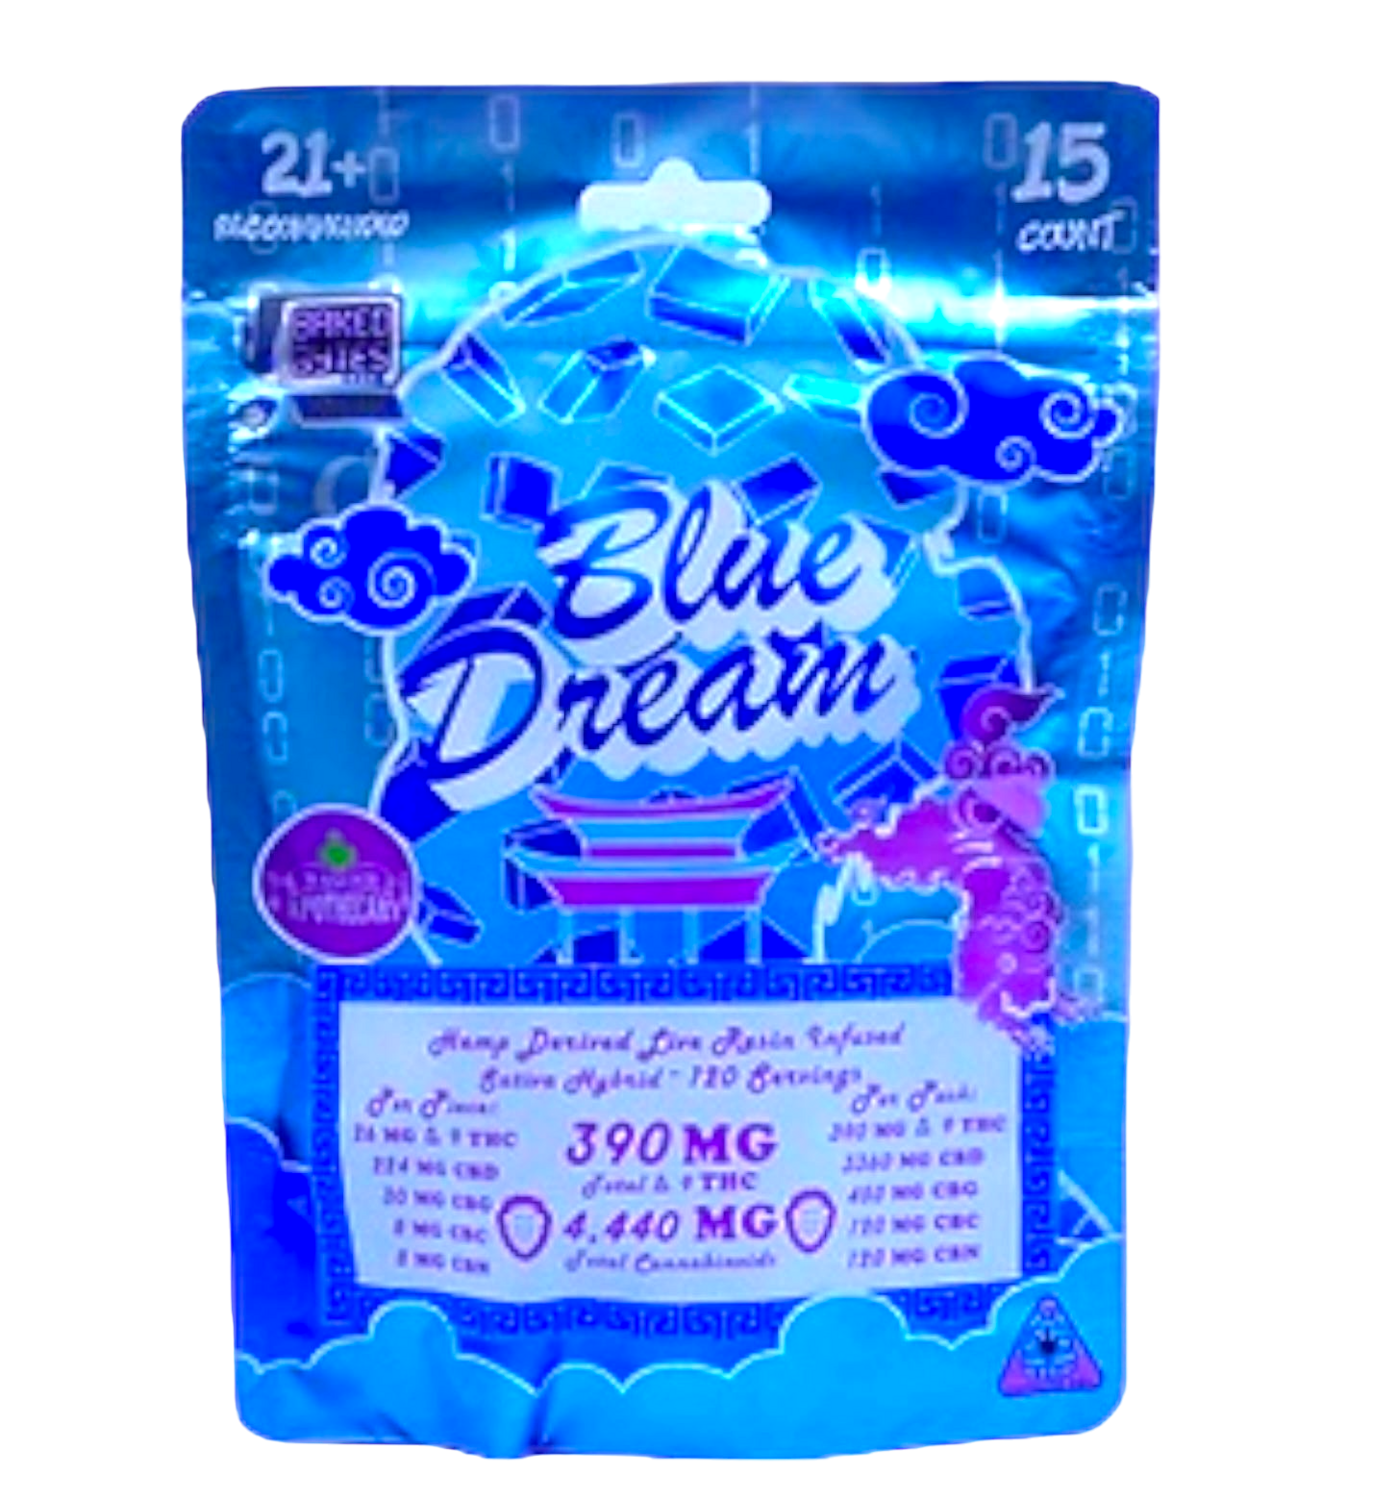 Baked Bytes Blue Dream Δ9 THC Gummies- 390mg THC 4K MG Other Cannabinoids (15 count)